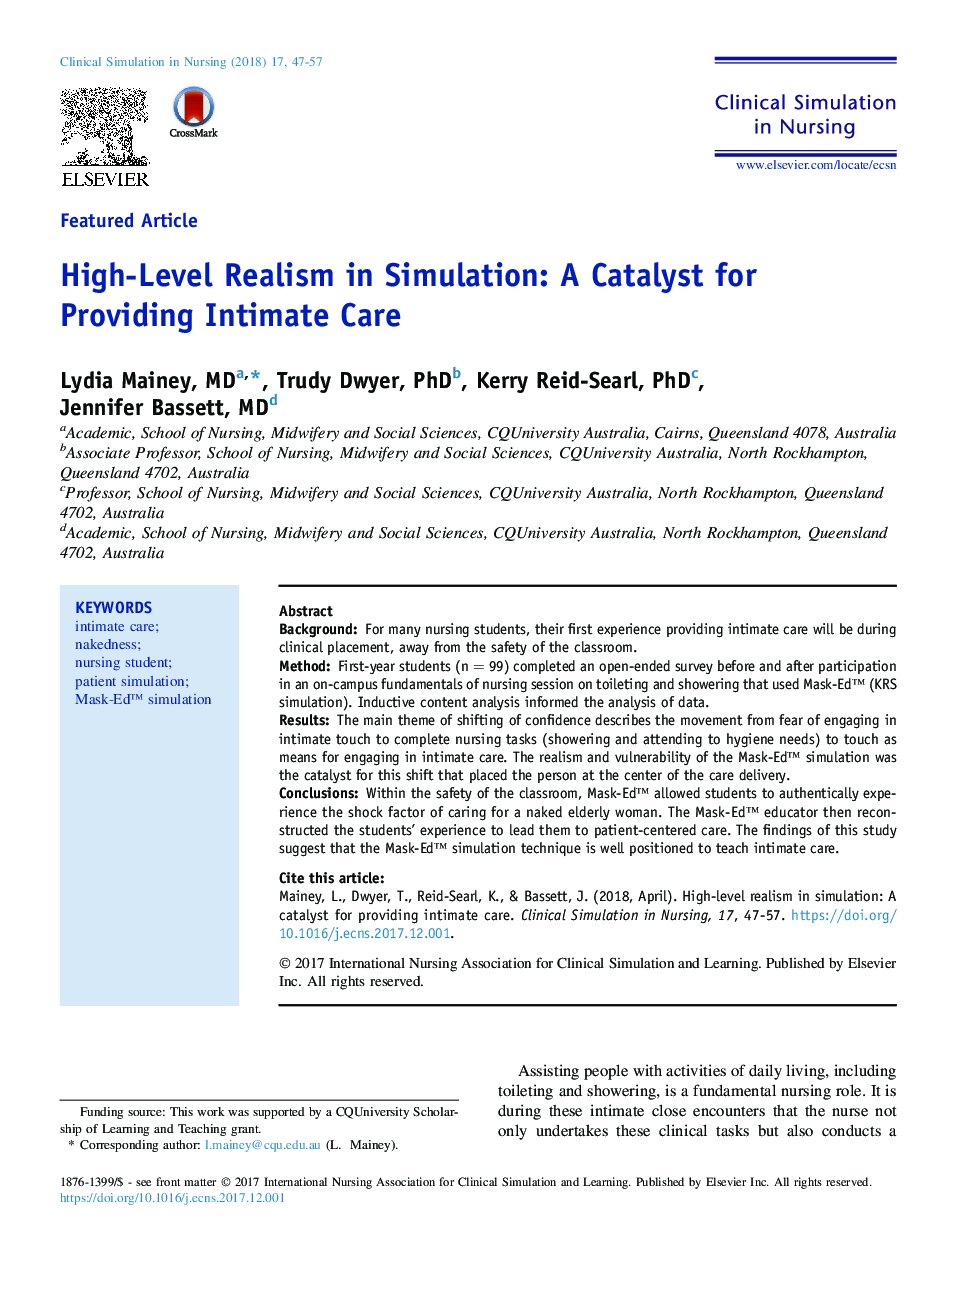 High-Level Realism in Simulation: A Catalyst for Providing Intimate Care